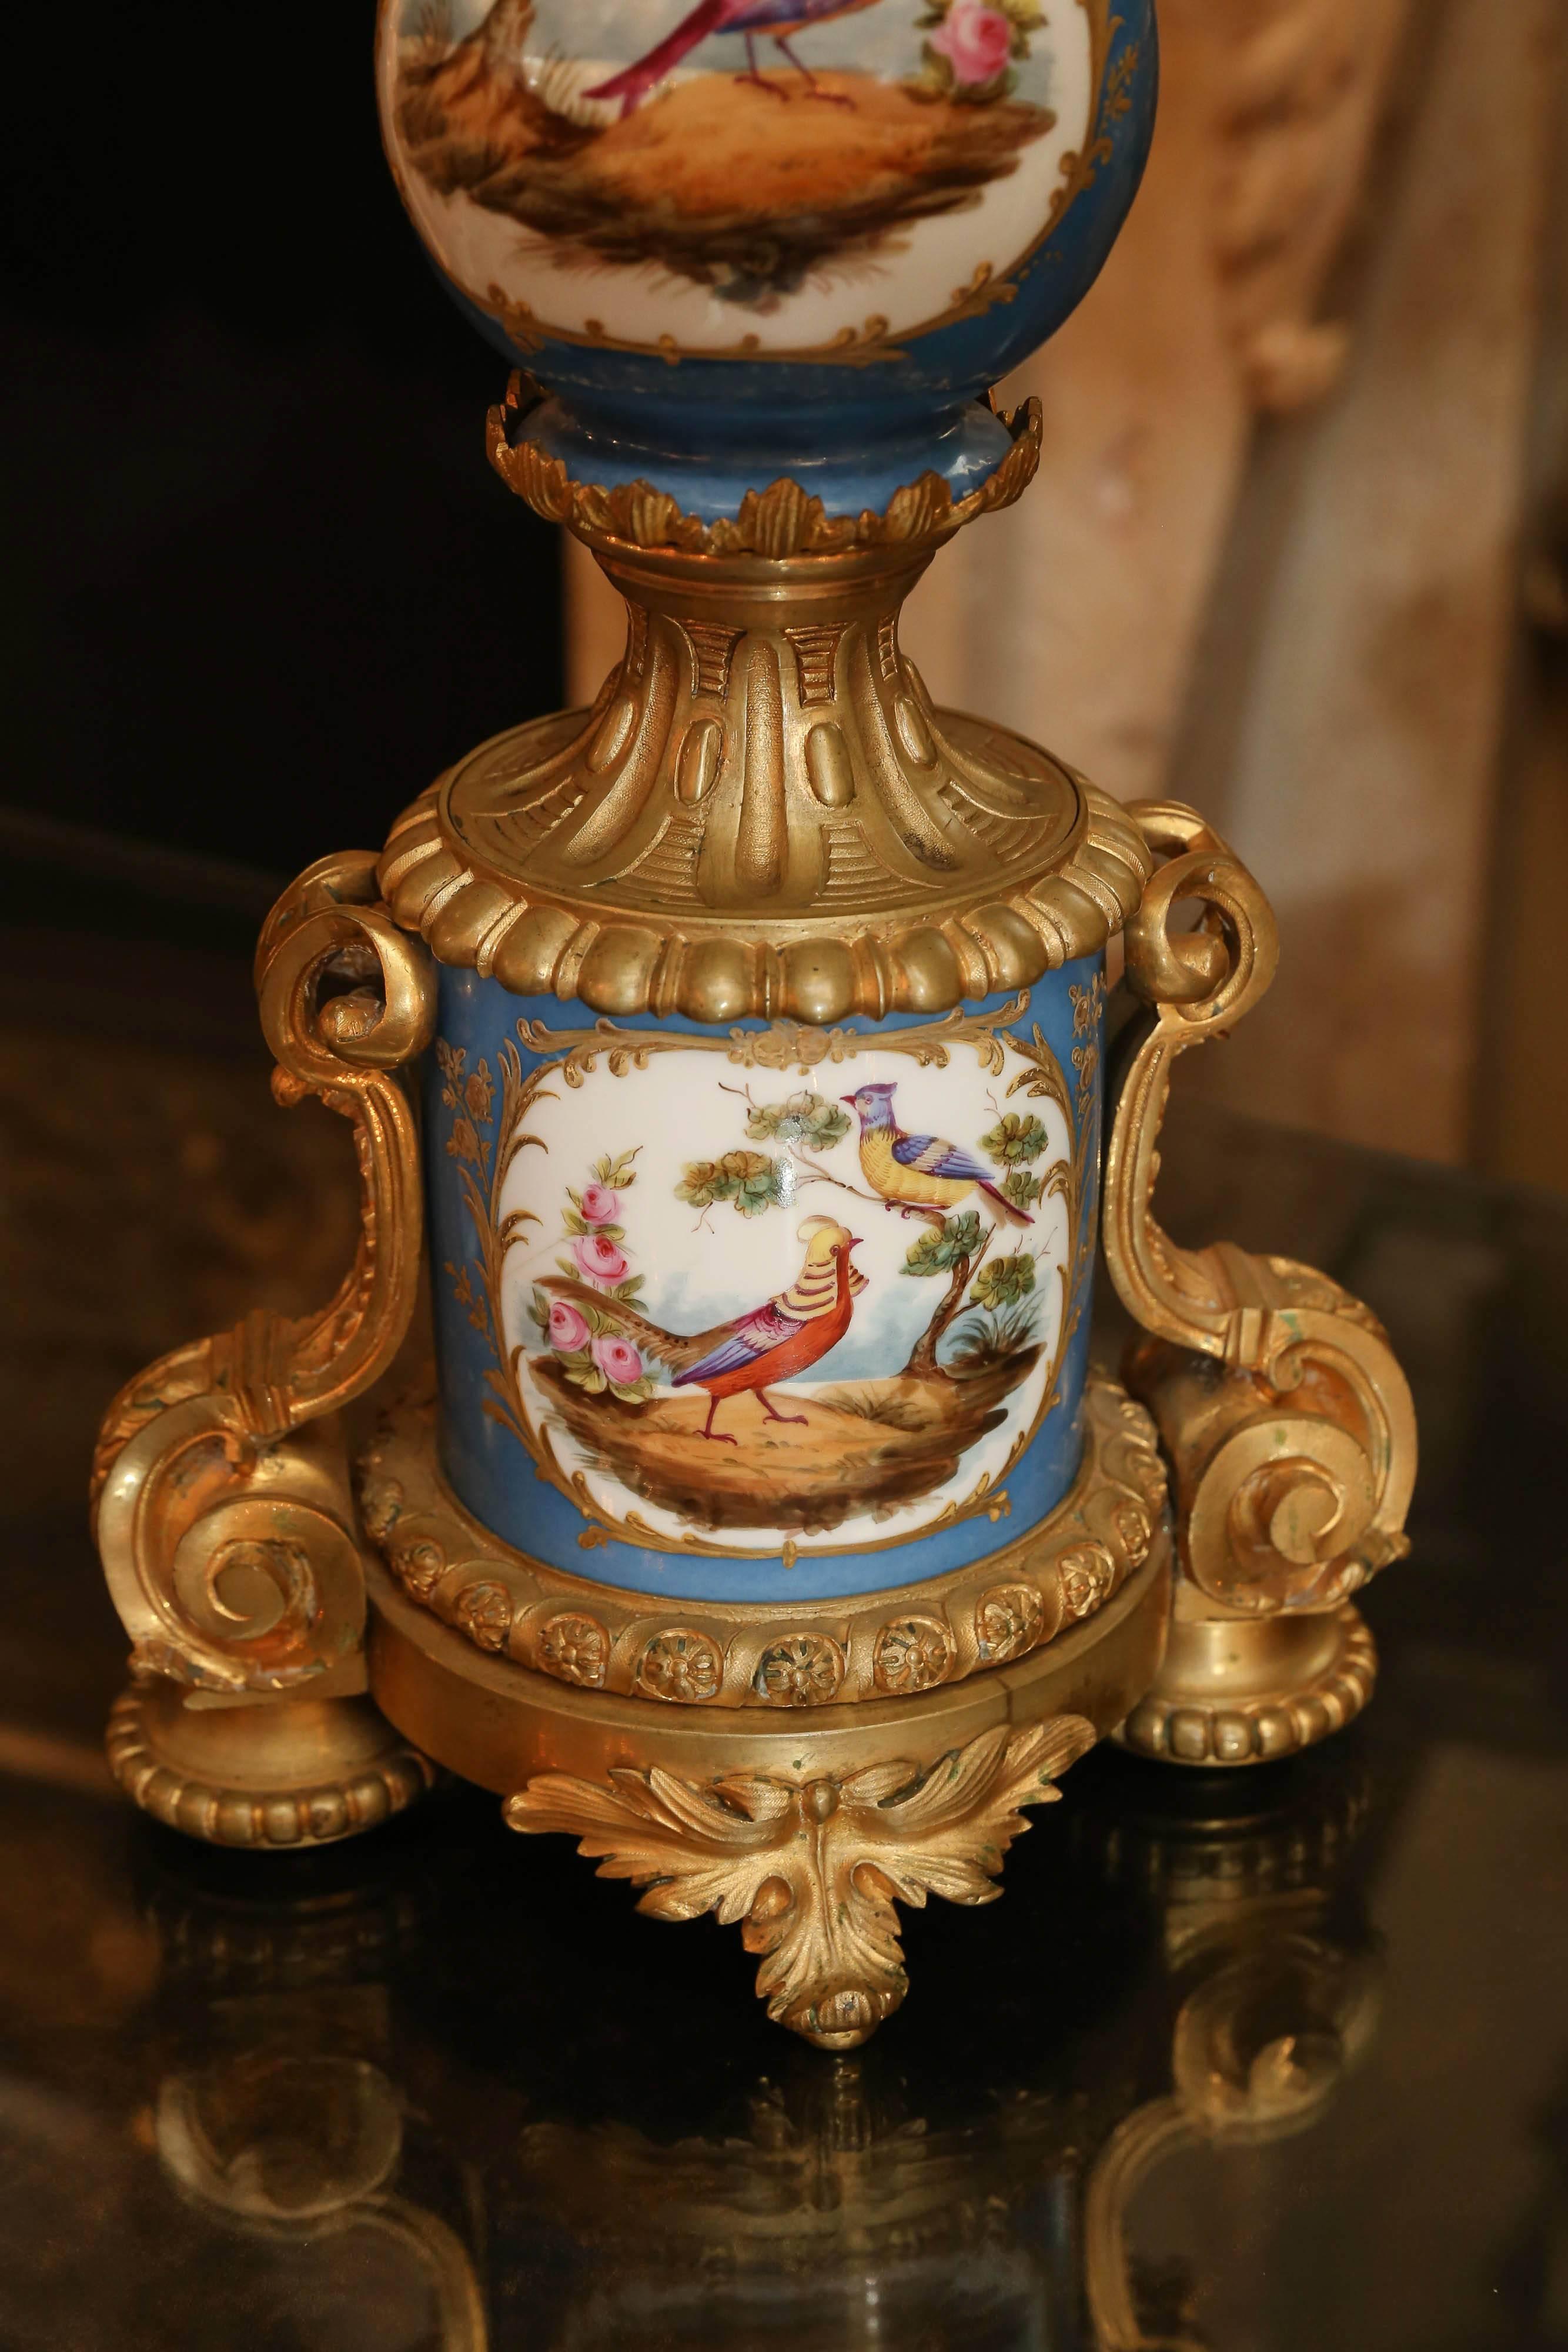 Large and impressive Sevres porcelain candelabra mounted in gilt bronze
hand-painted in Celeste blue with lovely painting of birds and flowers.